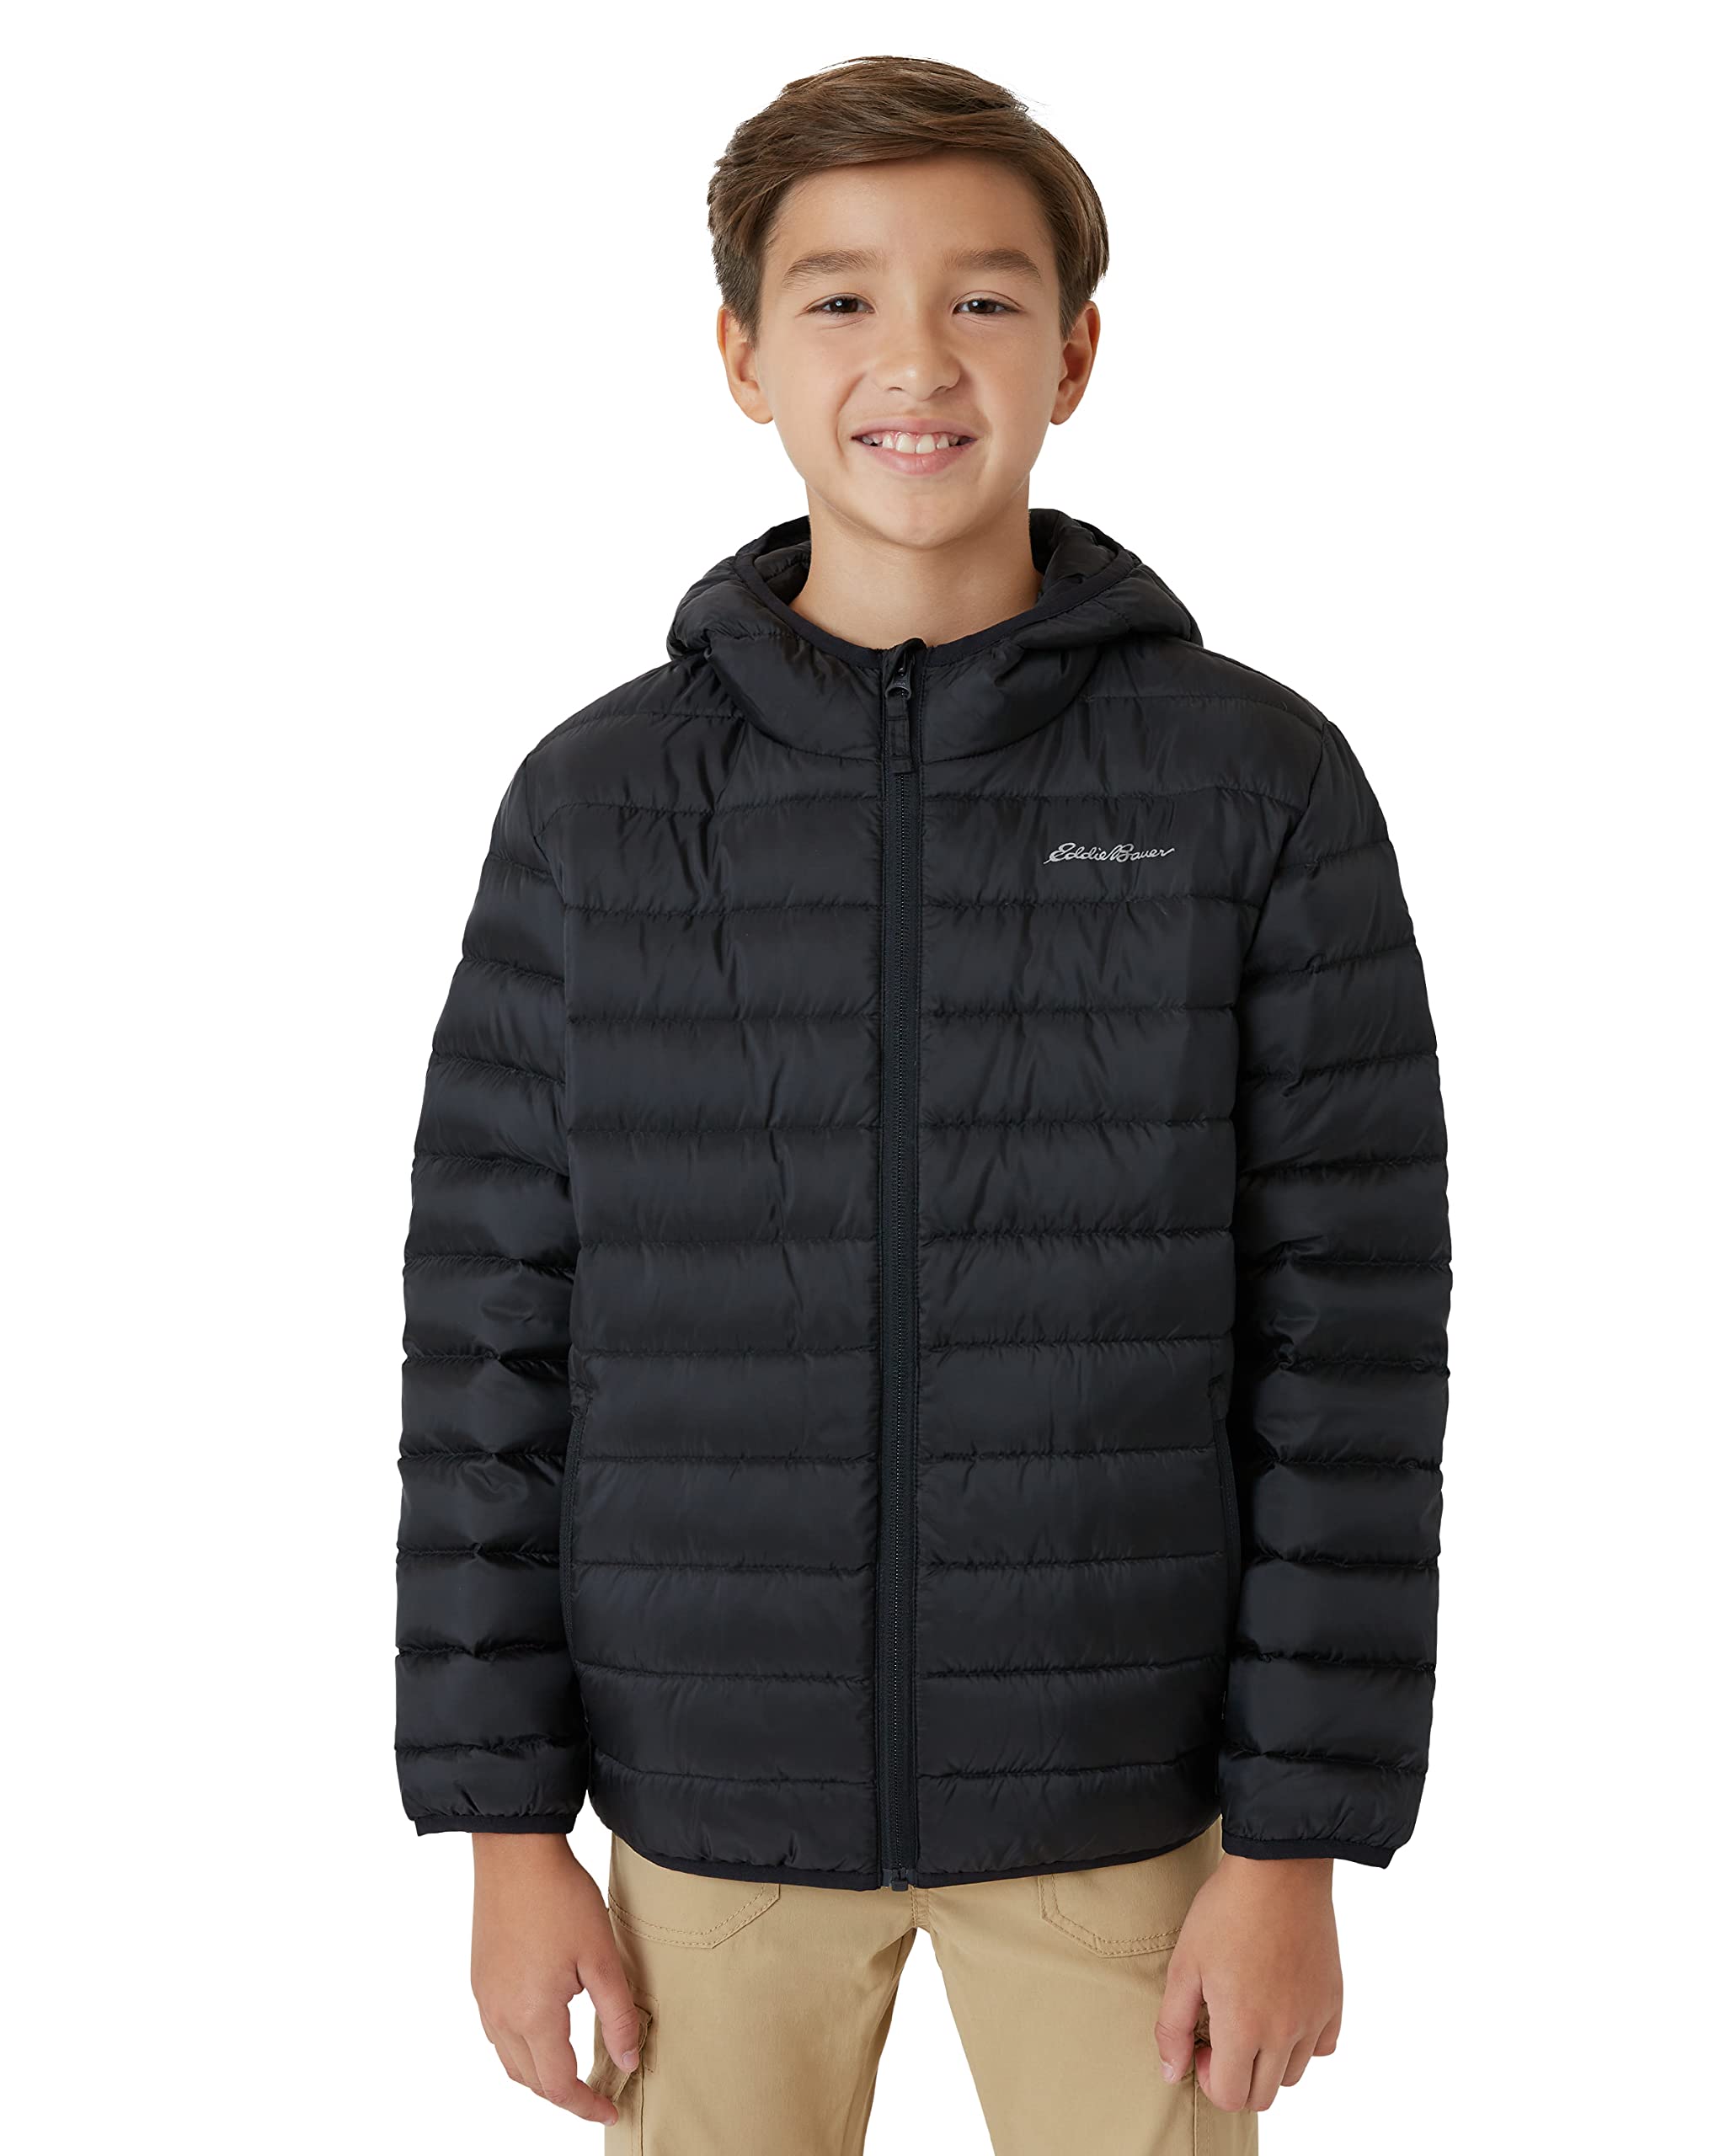 Eddie Bauer Kids Jacket - cirrusLite Weather Resistant Insulated Quilted Bubble Puffer coat for Boys and girls (3-20), Size 8, B